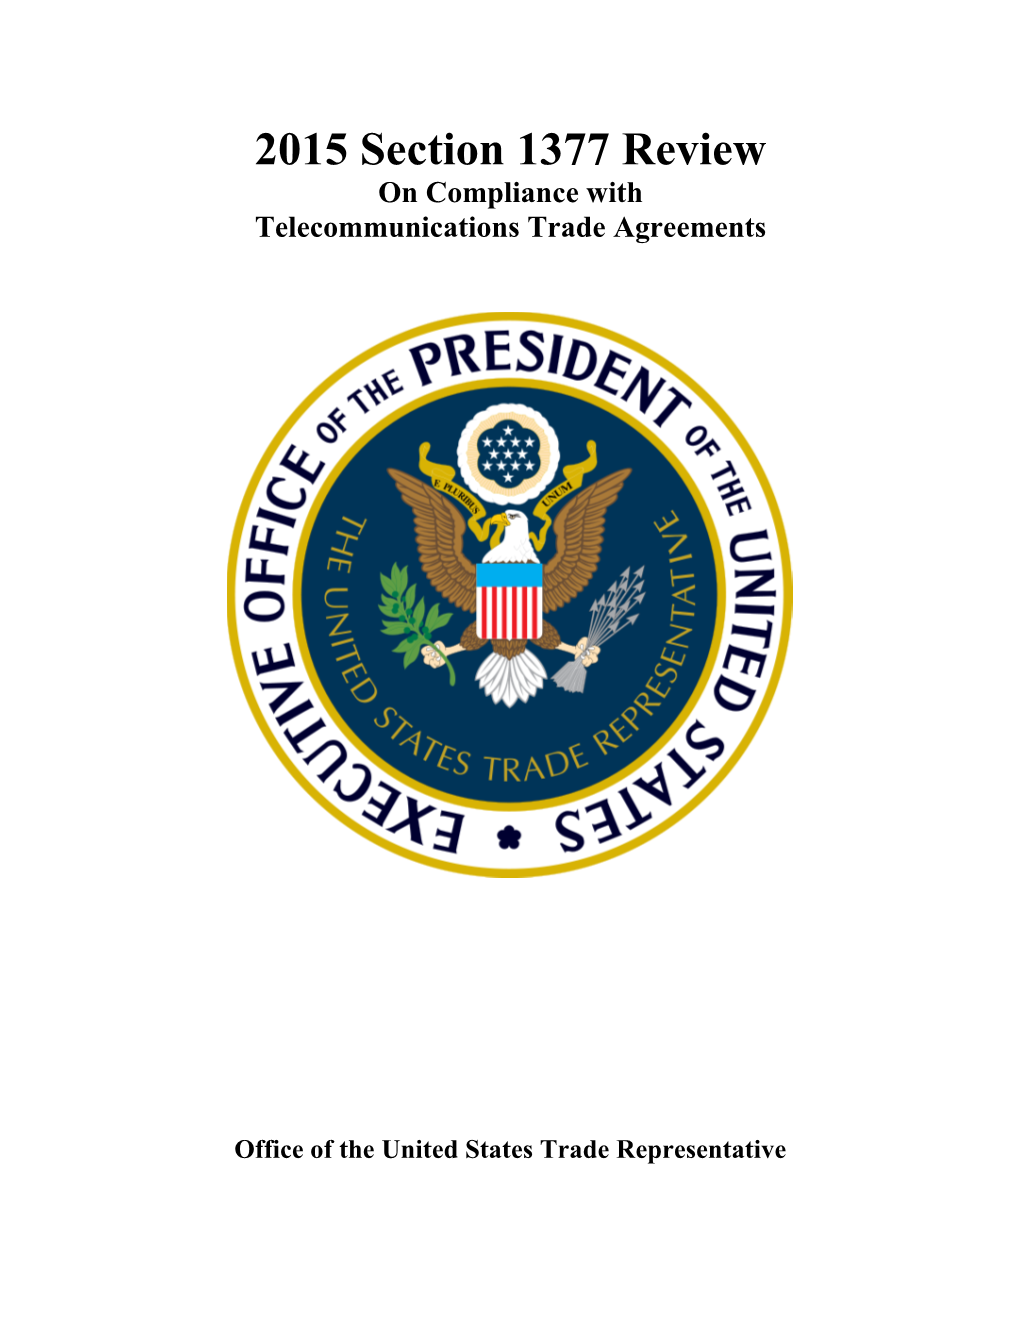 Results of the 2015 Section 1377 Review Of